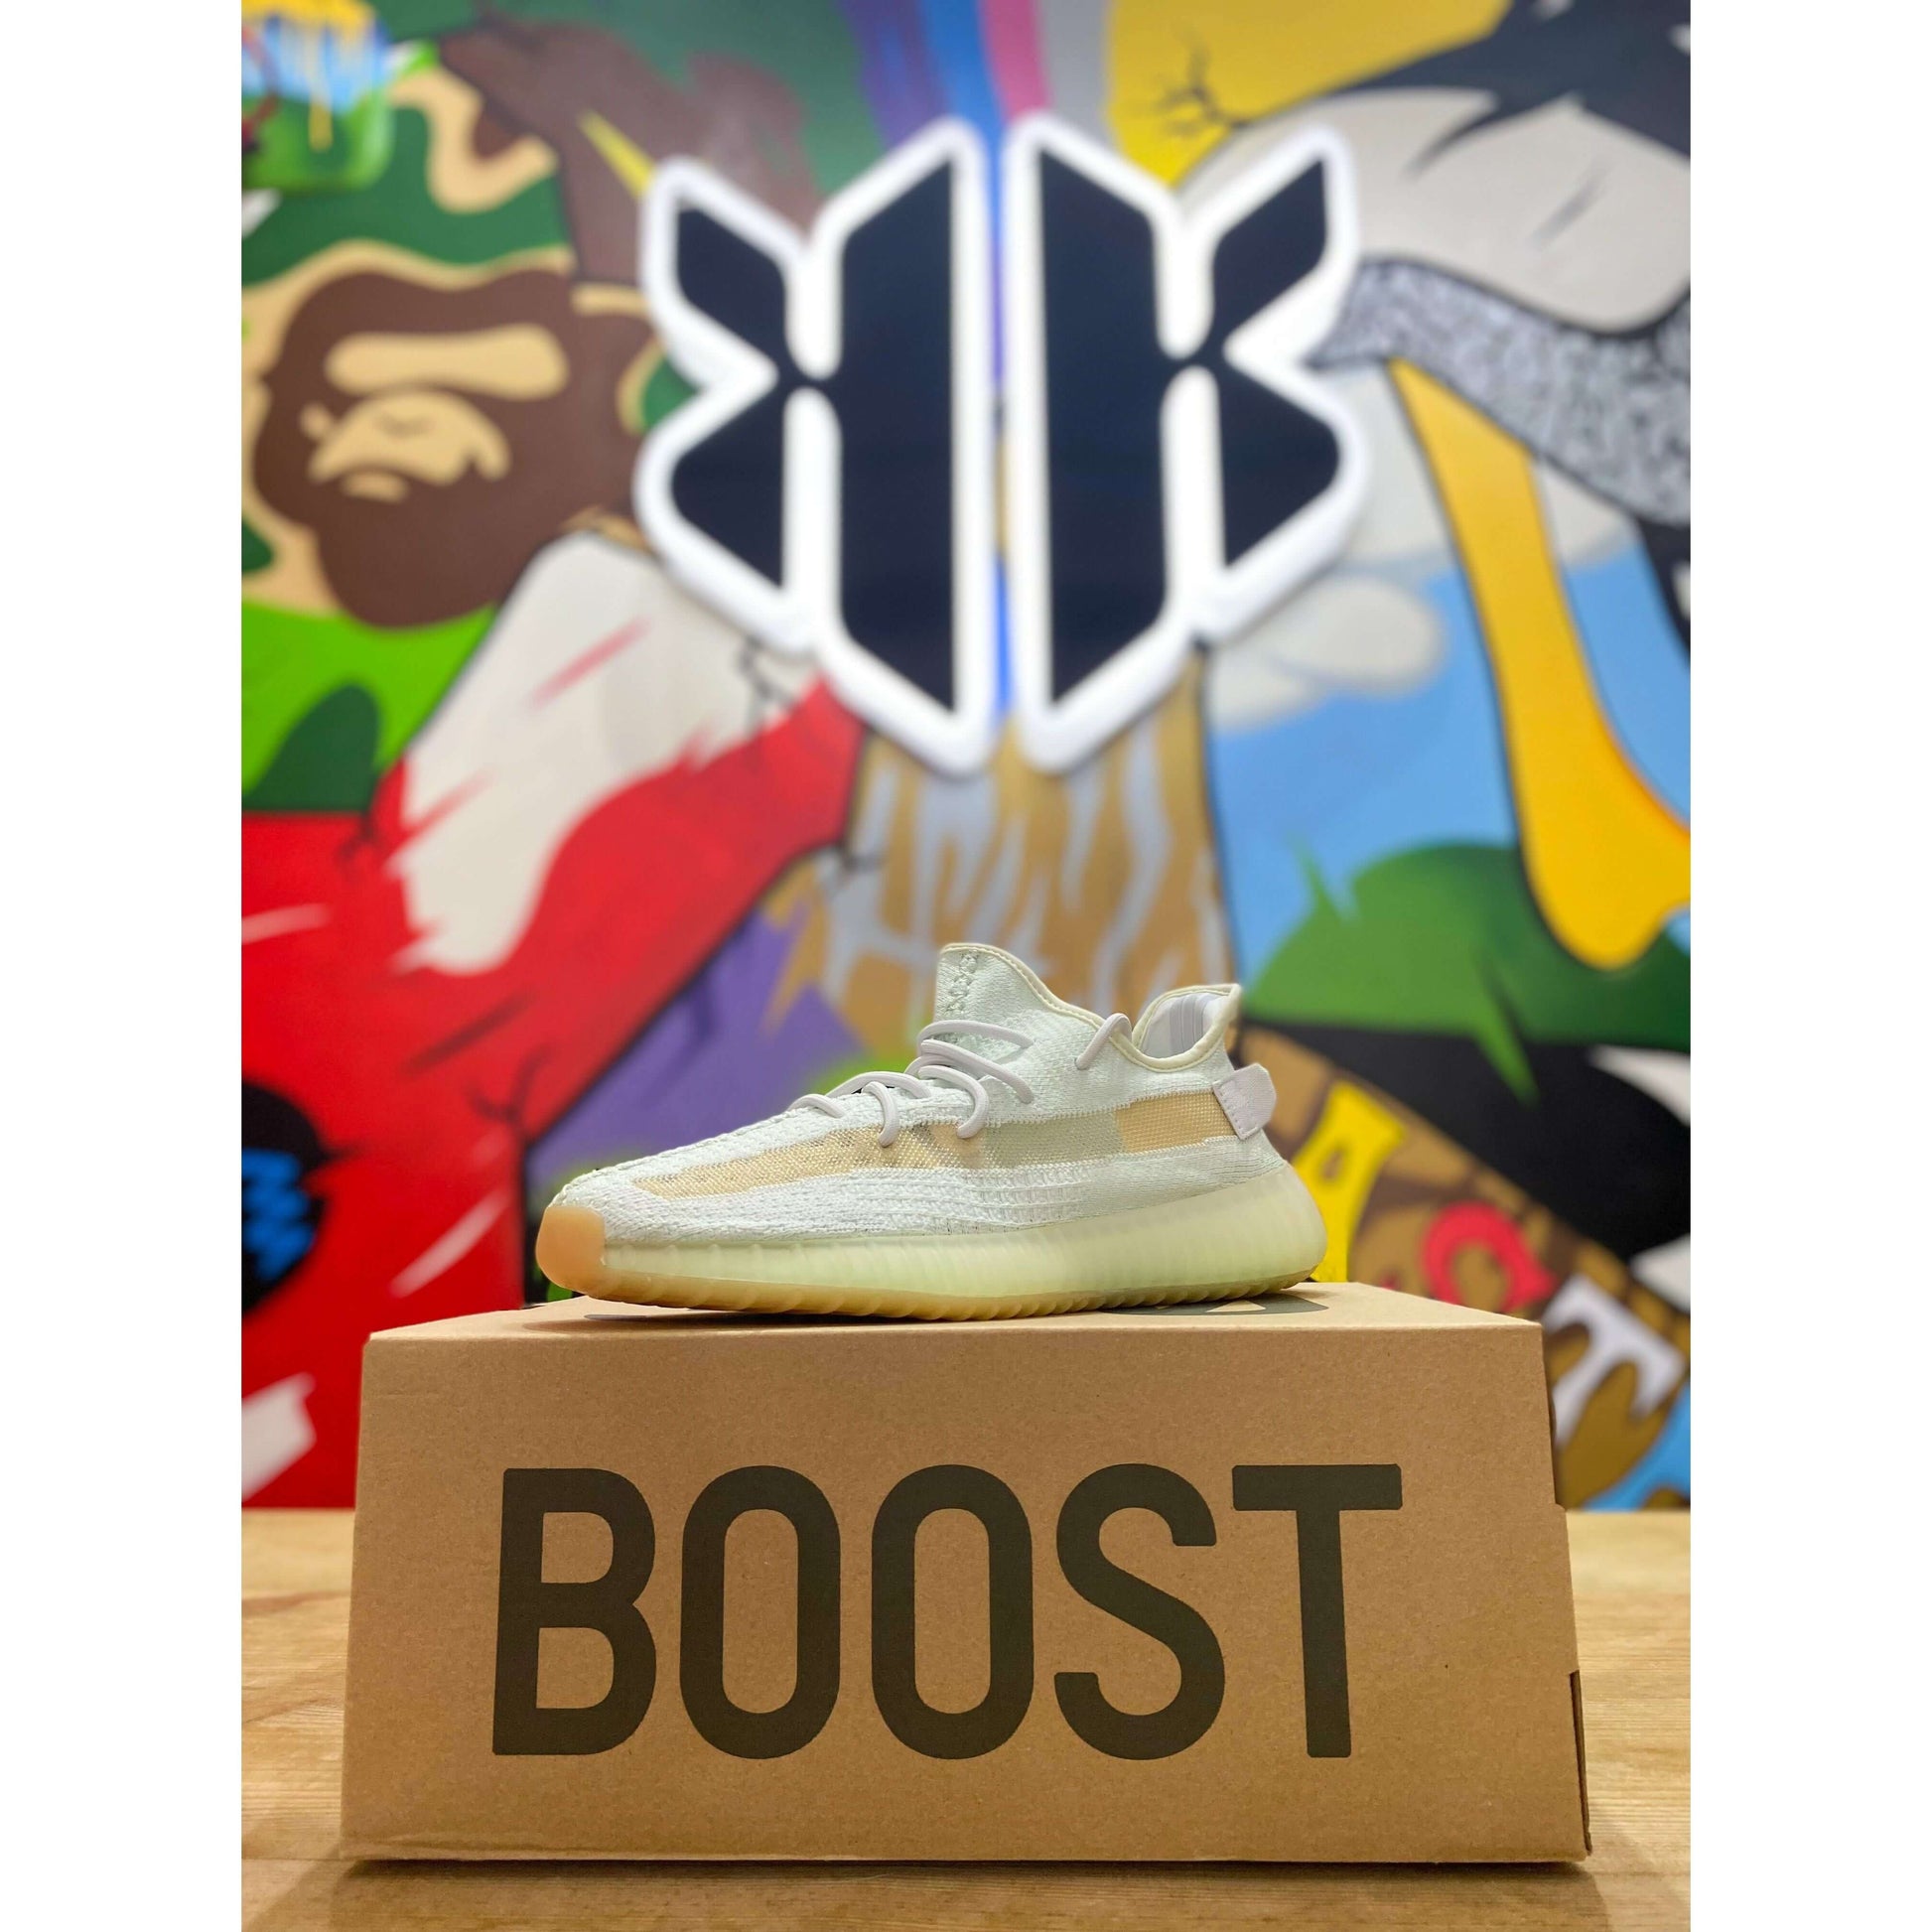 Adidas Yeezy Boost 350 V2 Hyperspace by Yeezy from £295.00